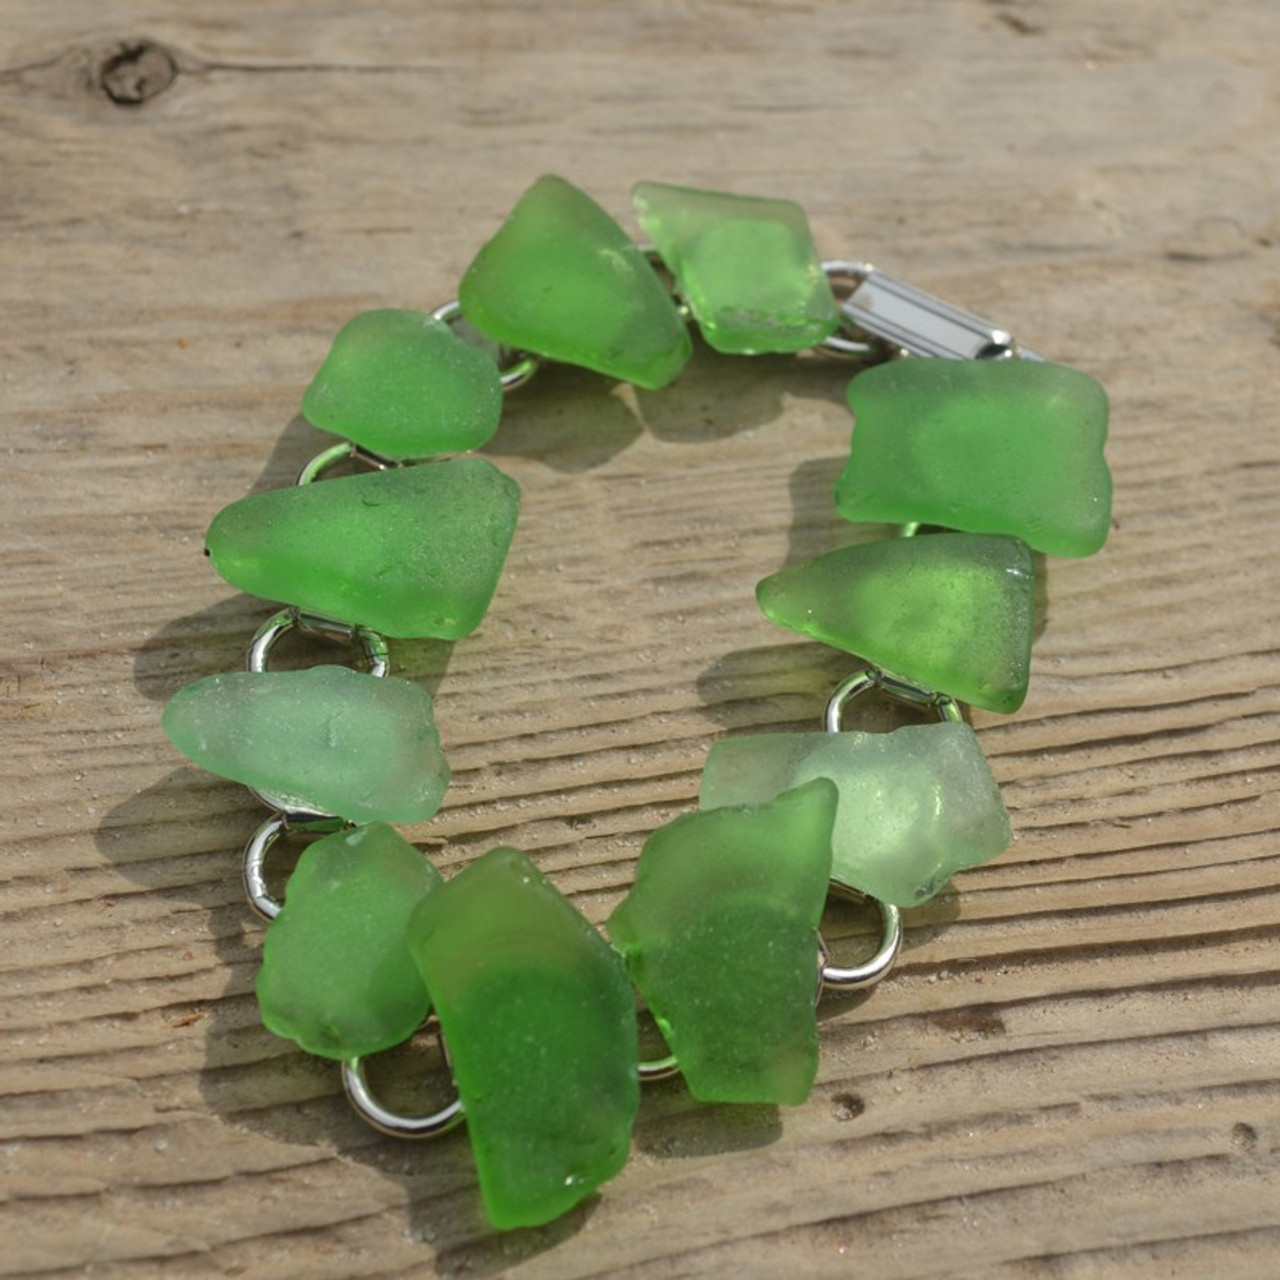 Kelly Green Surf Tumbled Sea Glass Charm Bracelet - Made to Order